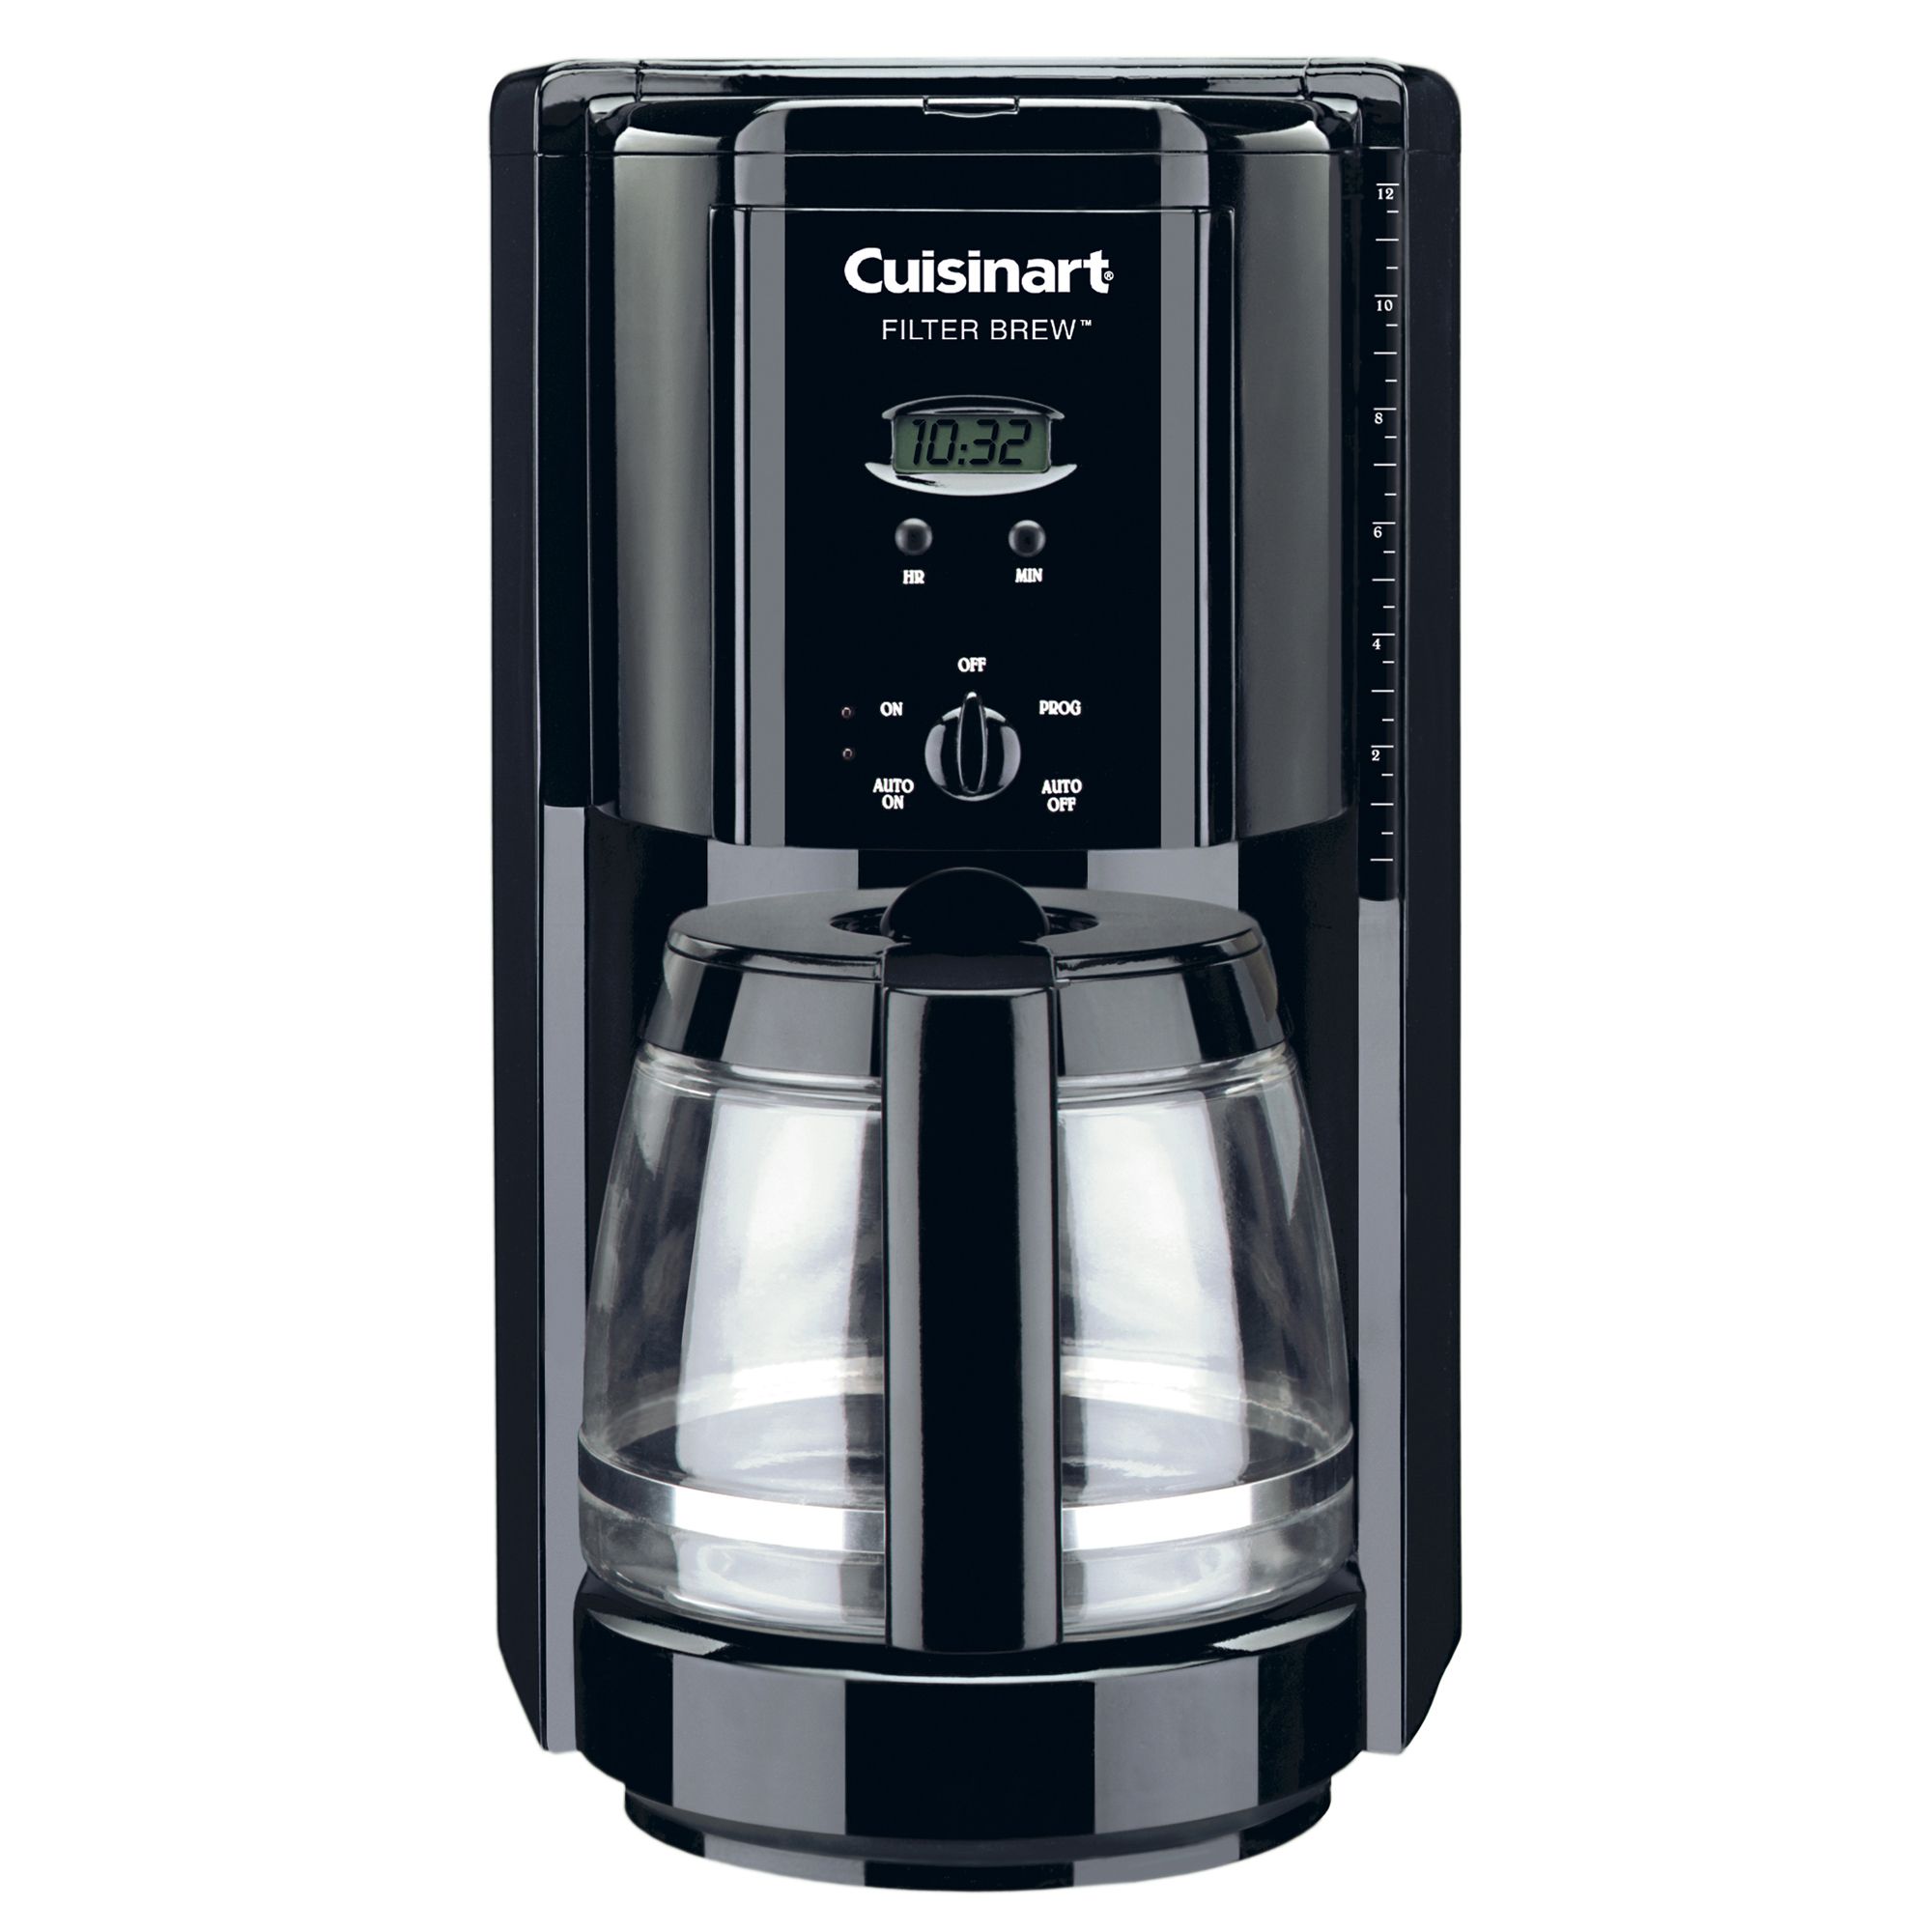 What is the purpose of a Cuisinart coffeemaker water filter?